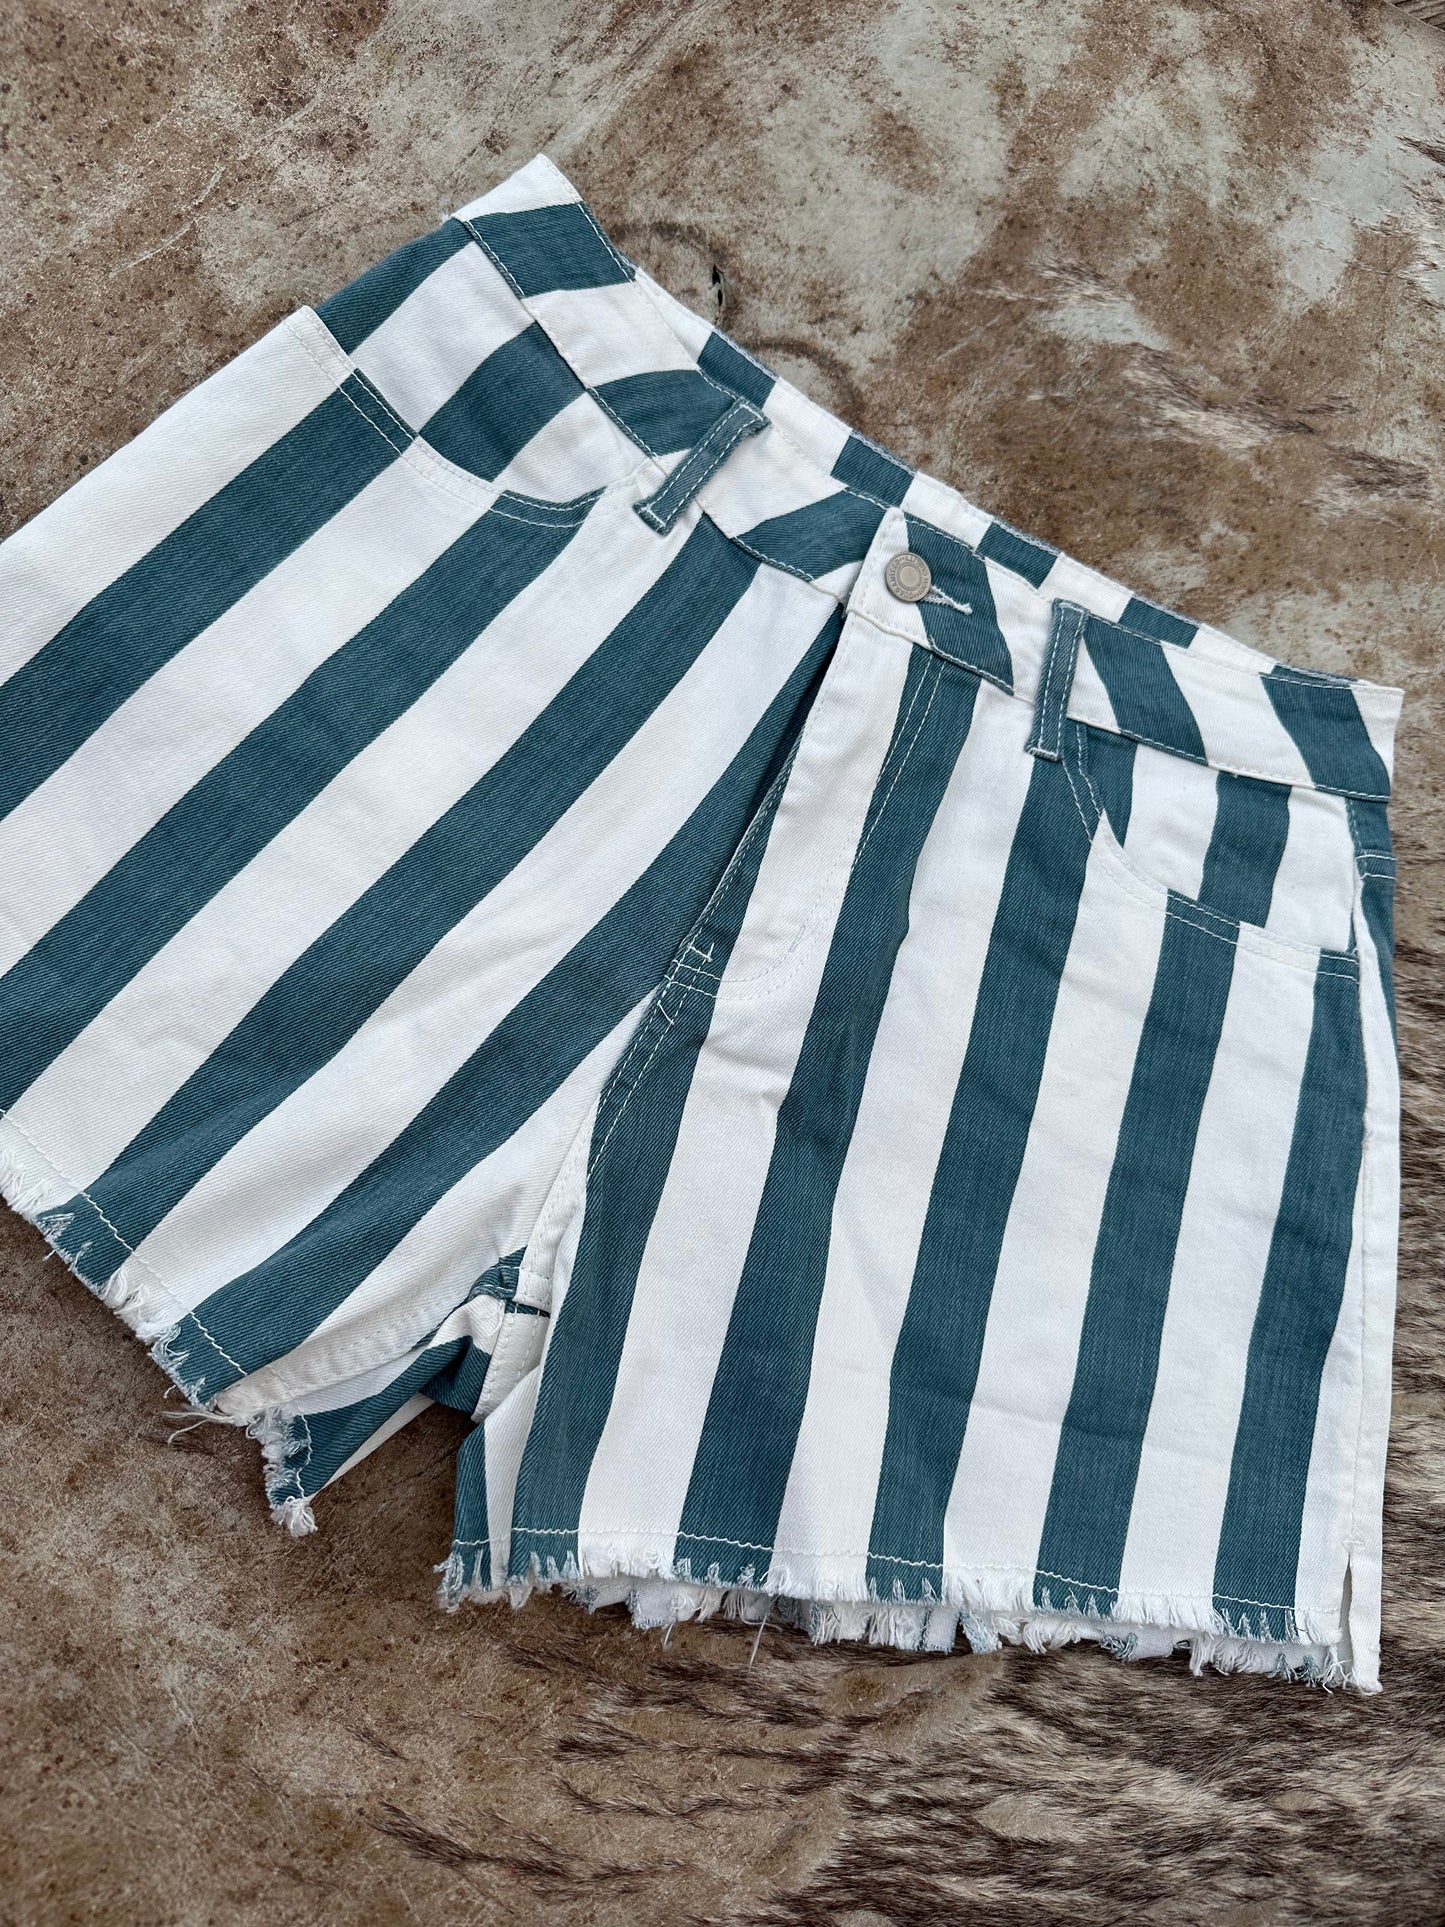 The Striped River Shorts